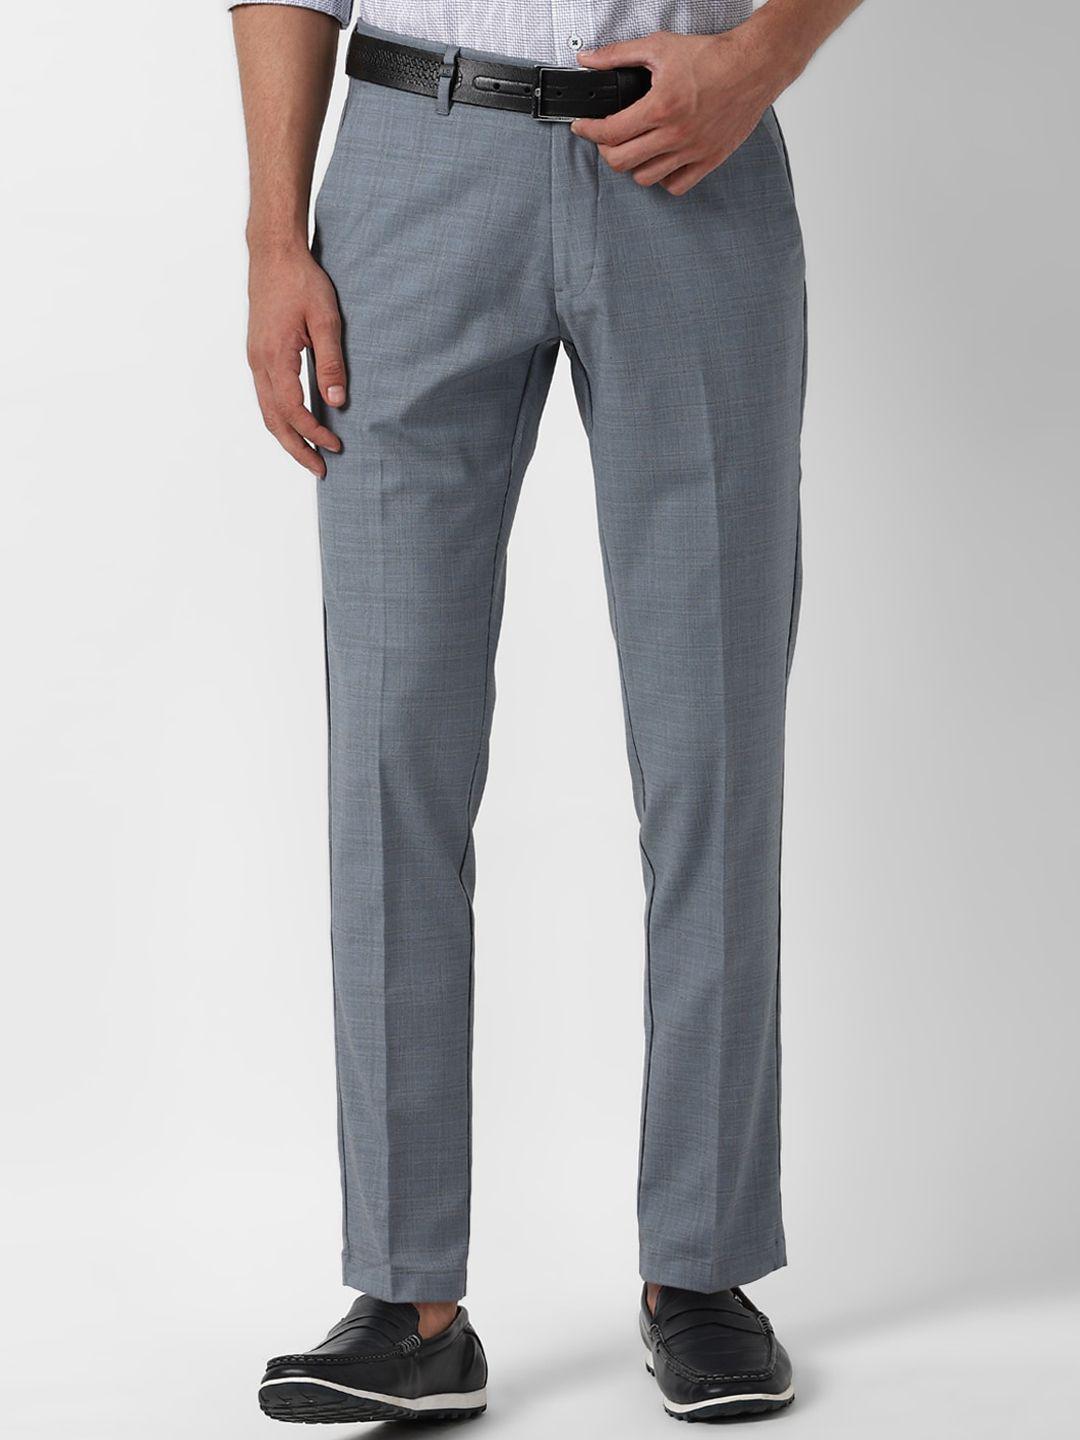 louis philippe sport men grey textured formal trousers